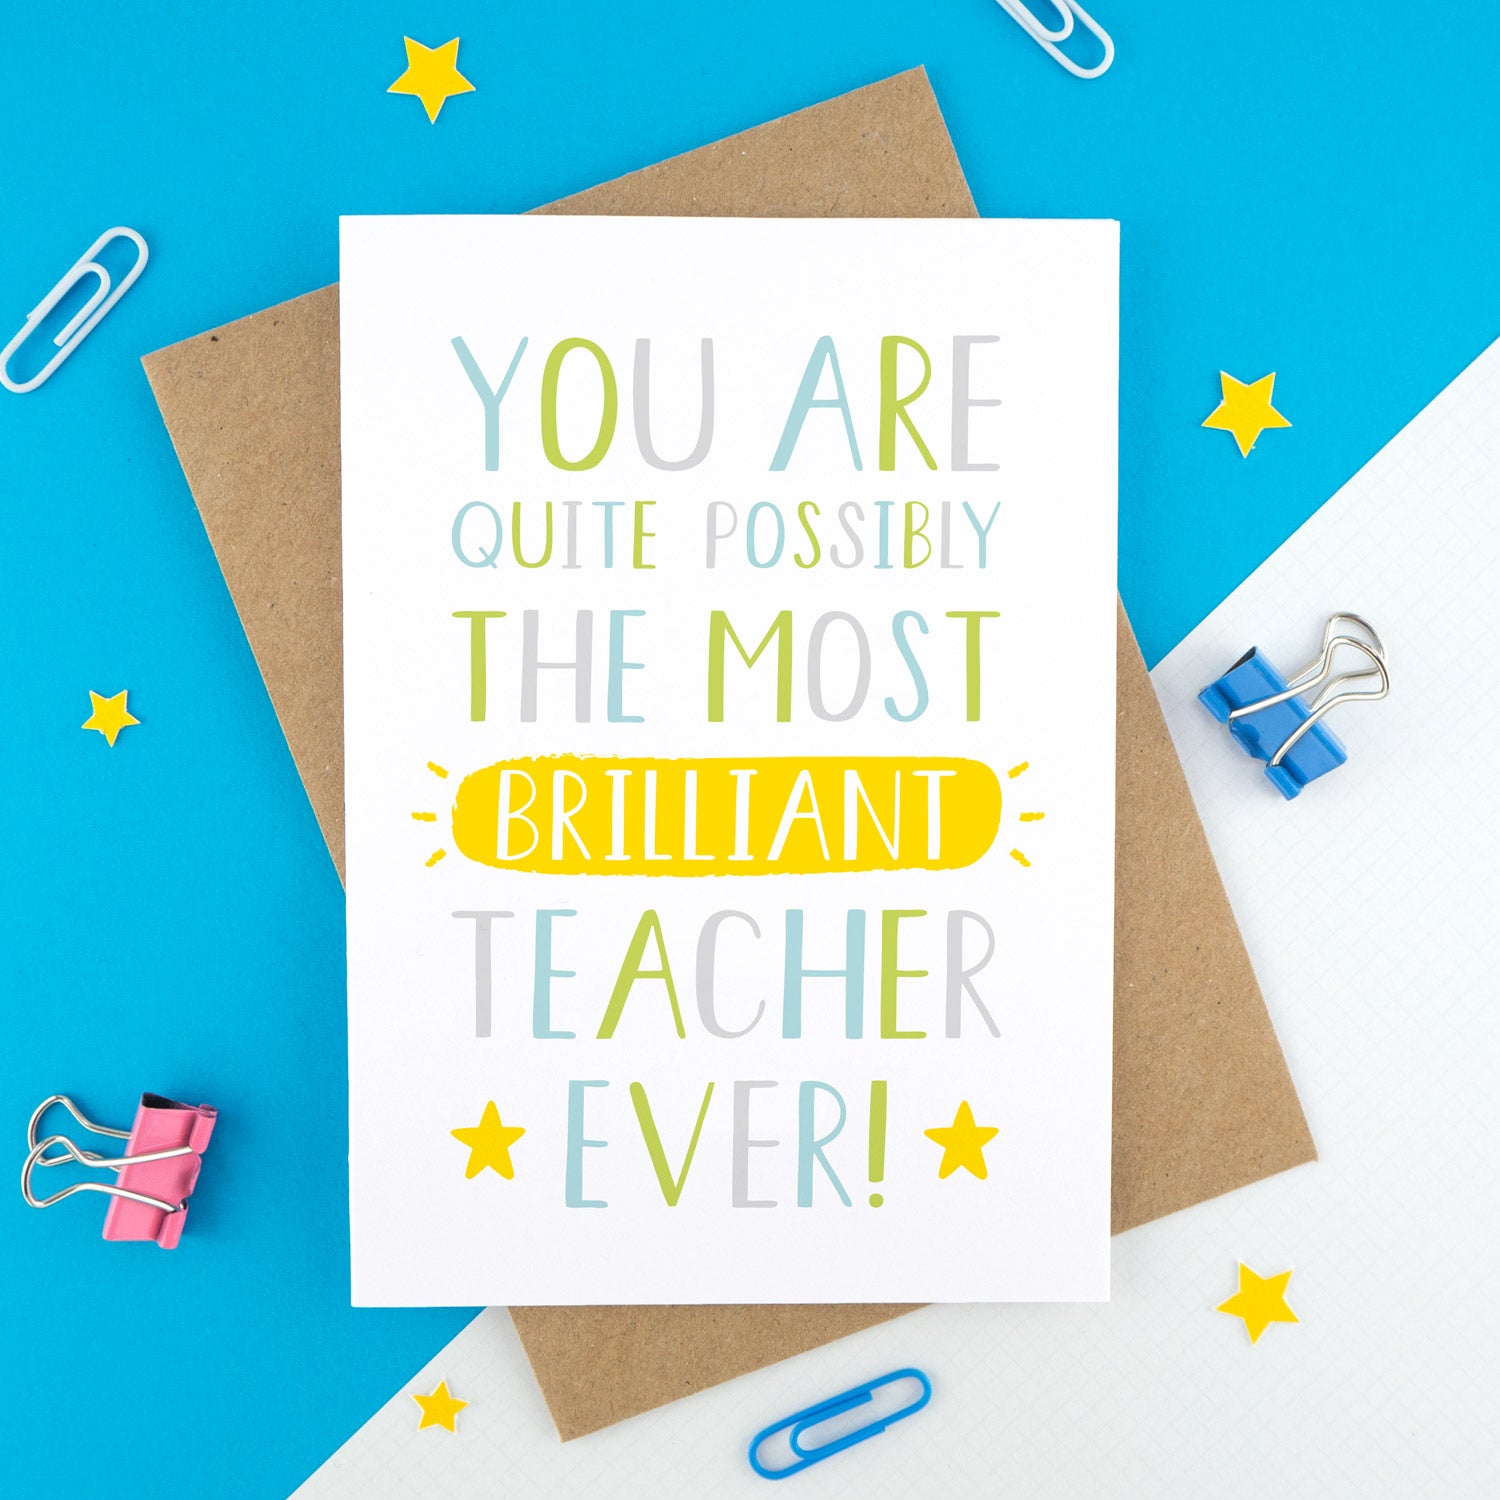 A thank you teacher card that reads "You are quite possibly the most brilliant teacher ever!" with green, blue and grey typography with a burst of yellow!